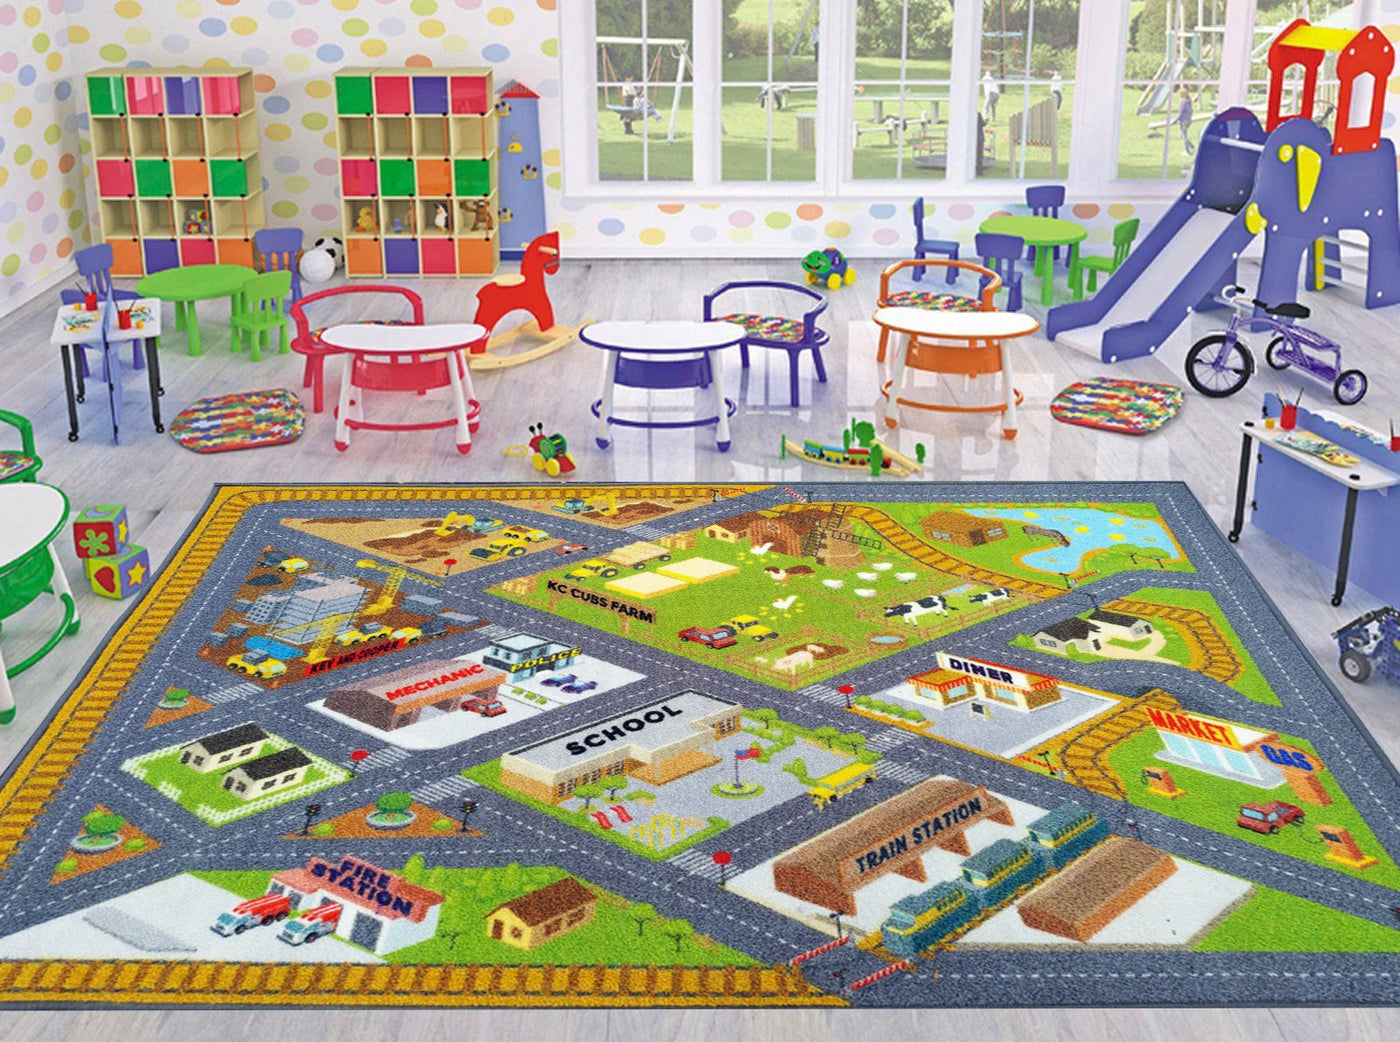 Kev & Cooper KCP010025-8X10 Playtime Collection Country Farm Road Map with Construction Site Educational Learning Area Rug Carpet for Kids and Children Bedroom and Playroom